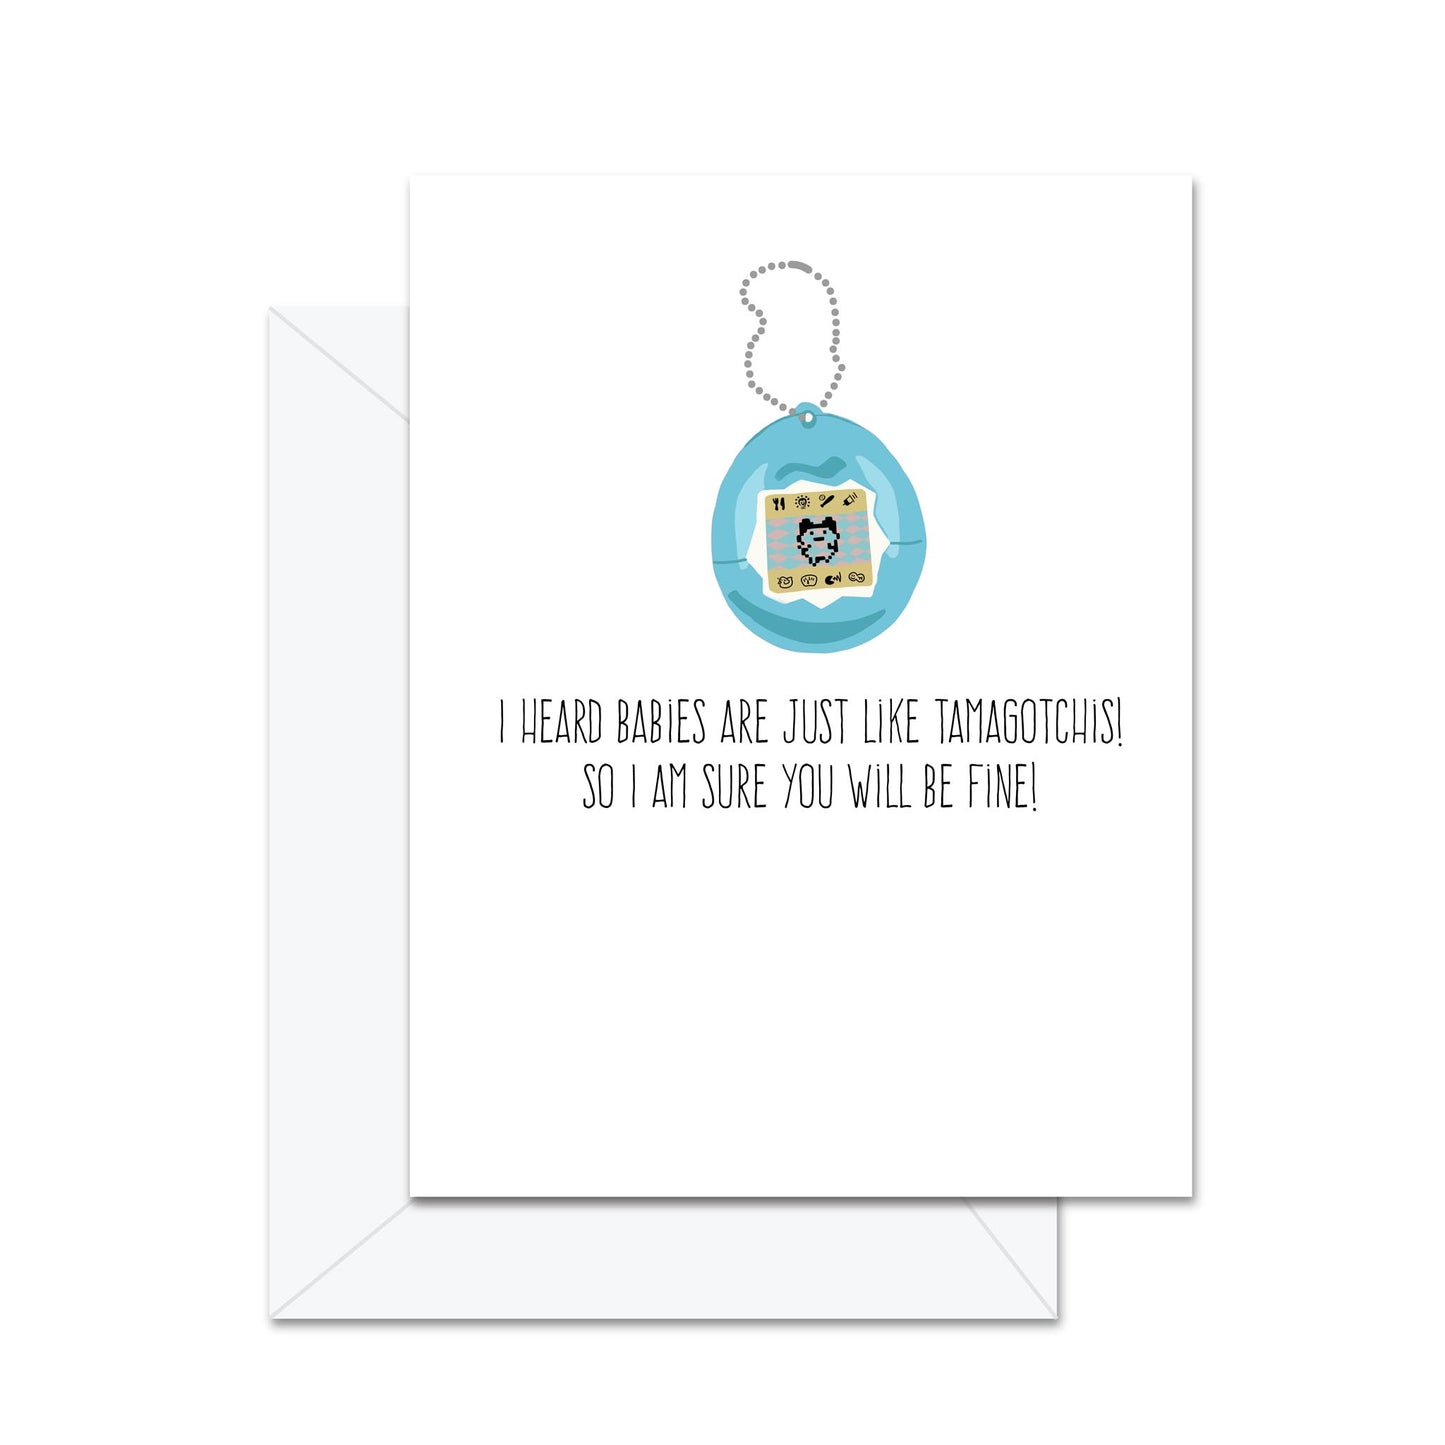 I Heard Babies Are Just Like Tamagotchis! So I Am Sure You Will Be Fine! - Greeting Card